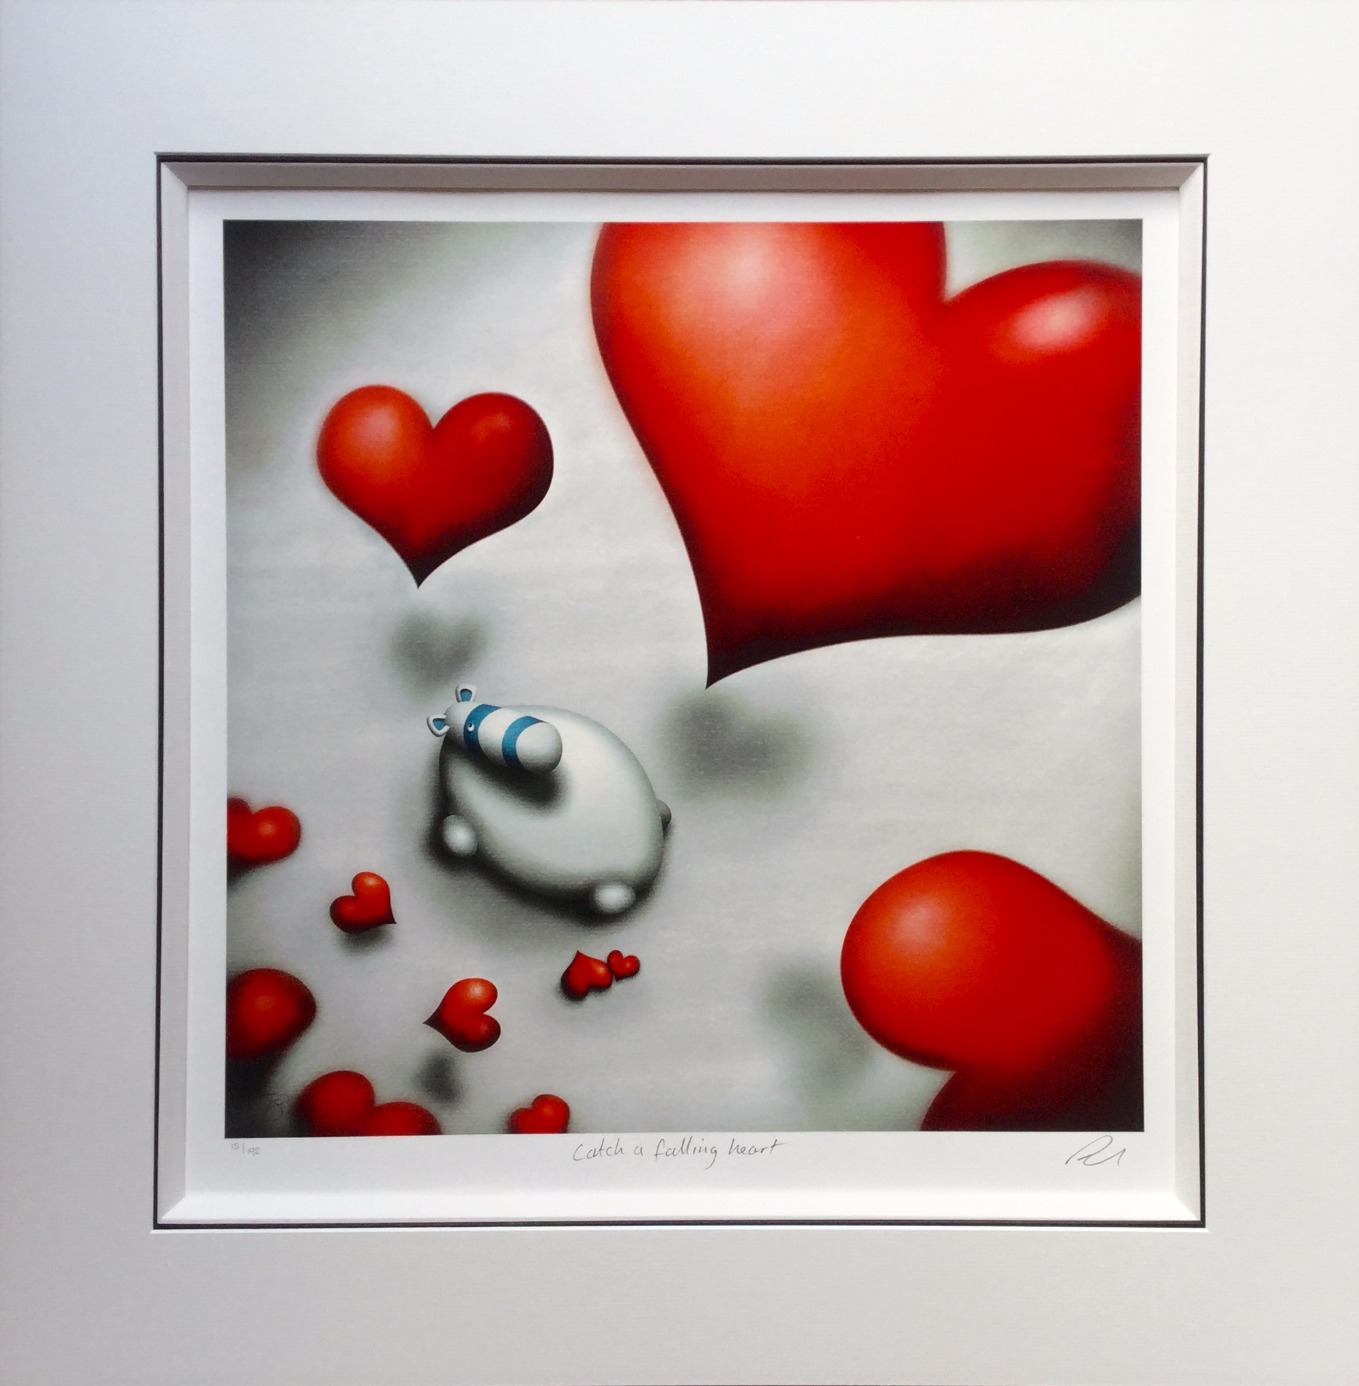 Catch a Falling Heart by Peter Smith, Love | Couple | Romance | Customer Sale